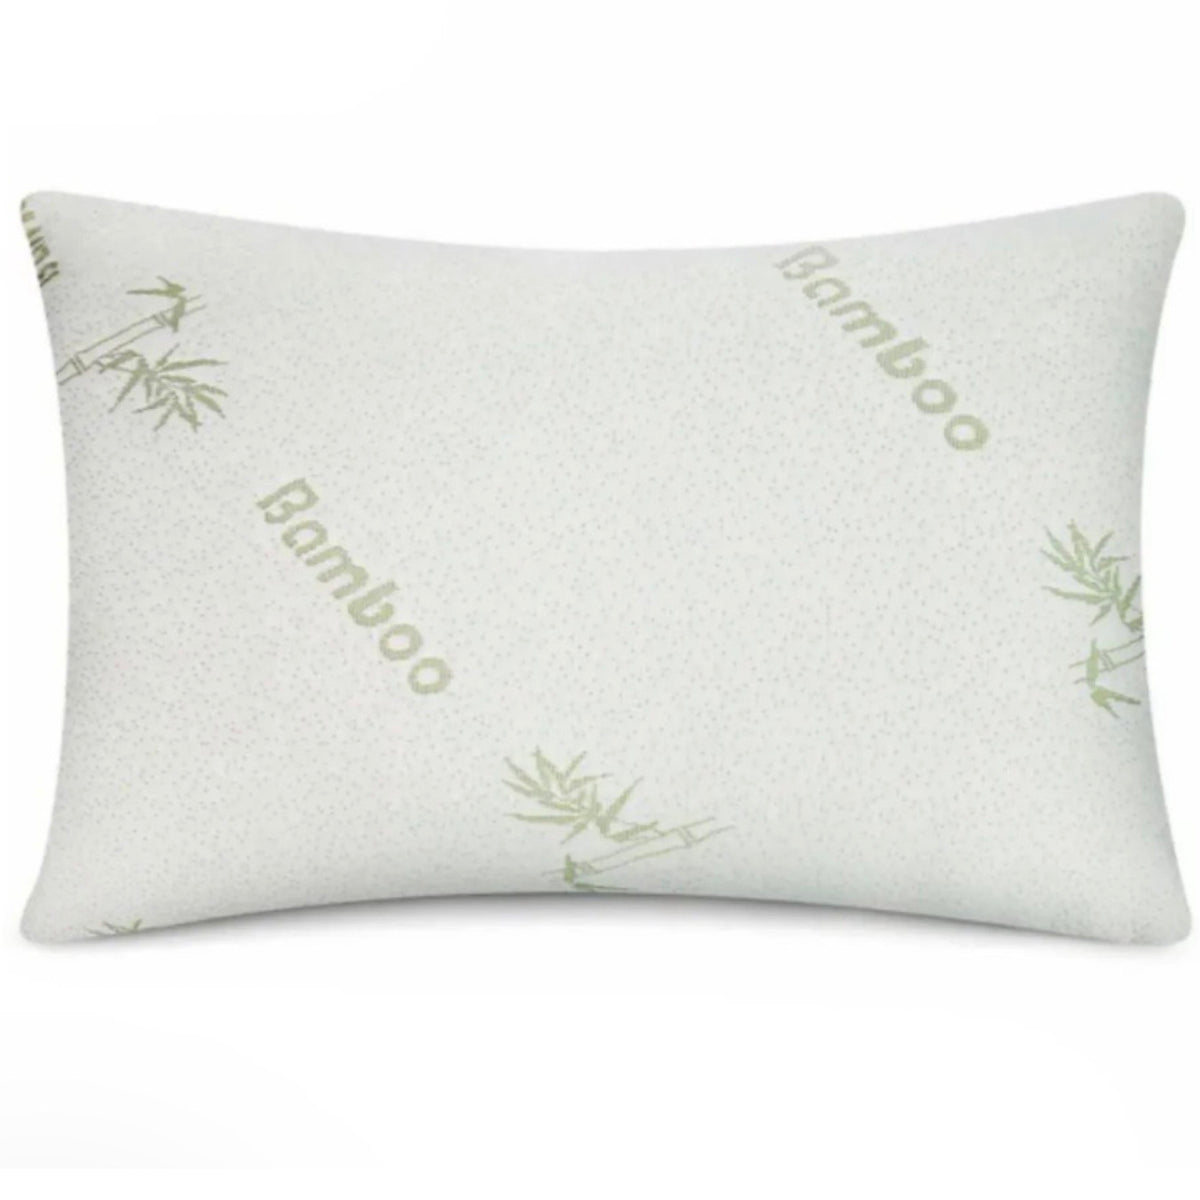 Queen Memory Foam Pillow w/Removable Bamboo Cover – Hypoallergenic & Antimicrobial